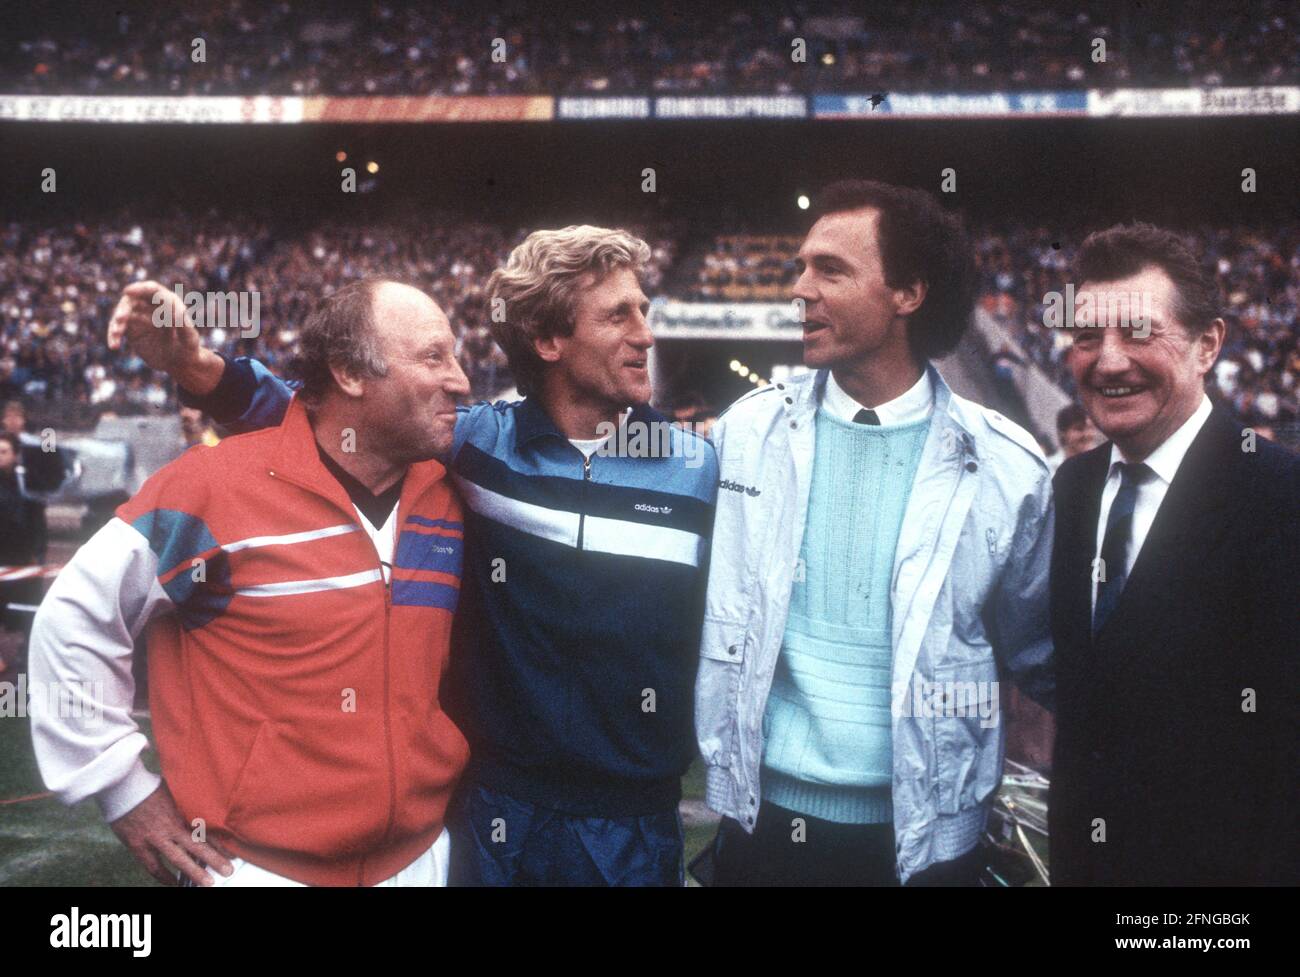 Farewell match for Klaus Fichtel on 26.08.1986 at the Parkstadion in Gelsenkirchen. From left: The three honorary captains of the German national team: Uwe Seeler, Franz Beckenbauer and Fritz Walter (from left) with Klaus Fichtel (2nd from left).  No model release ! [automated translation] Stock Photo